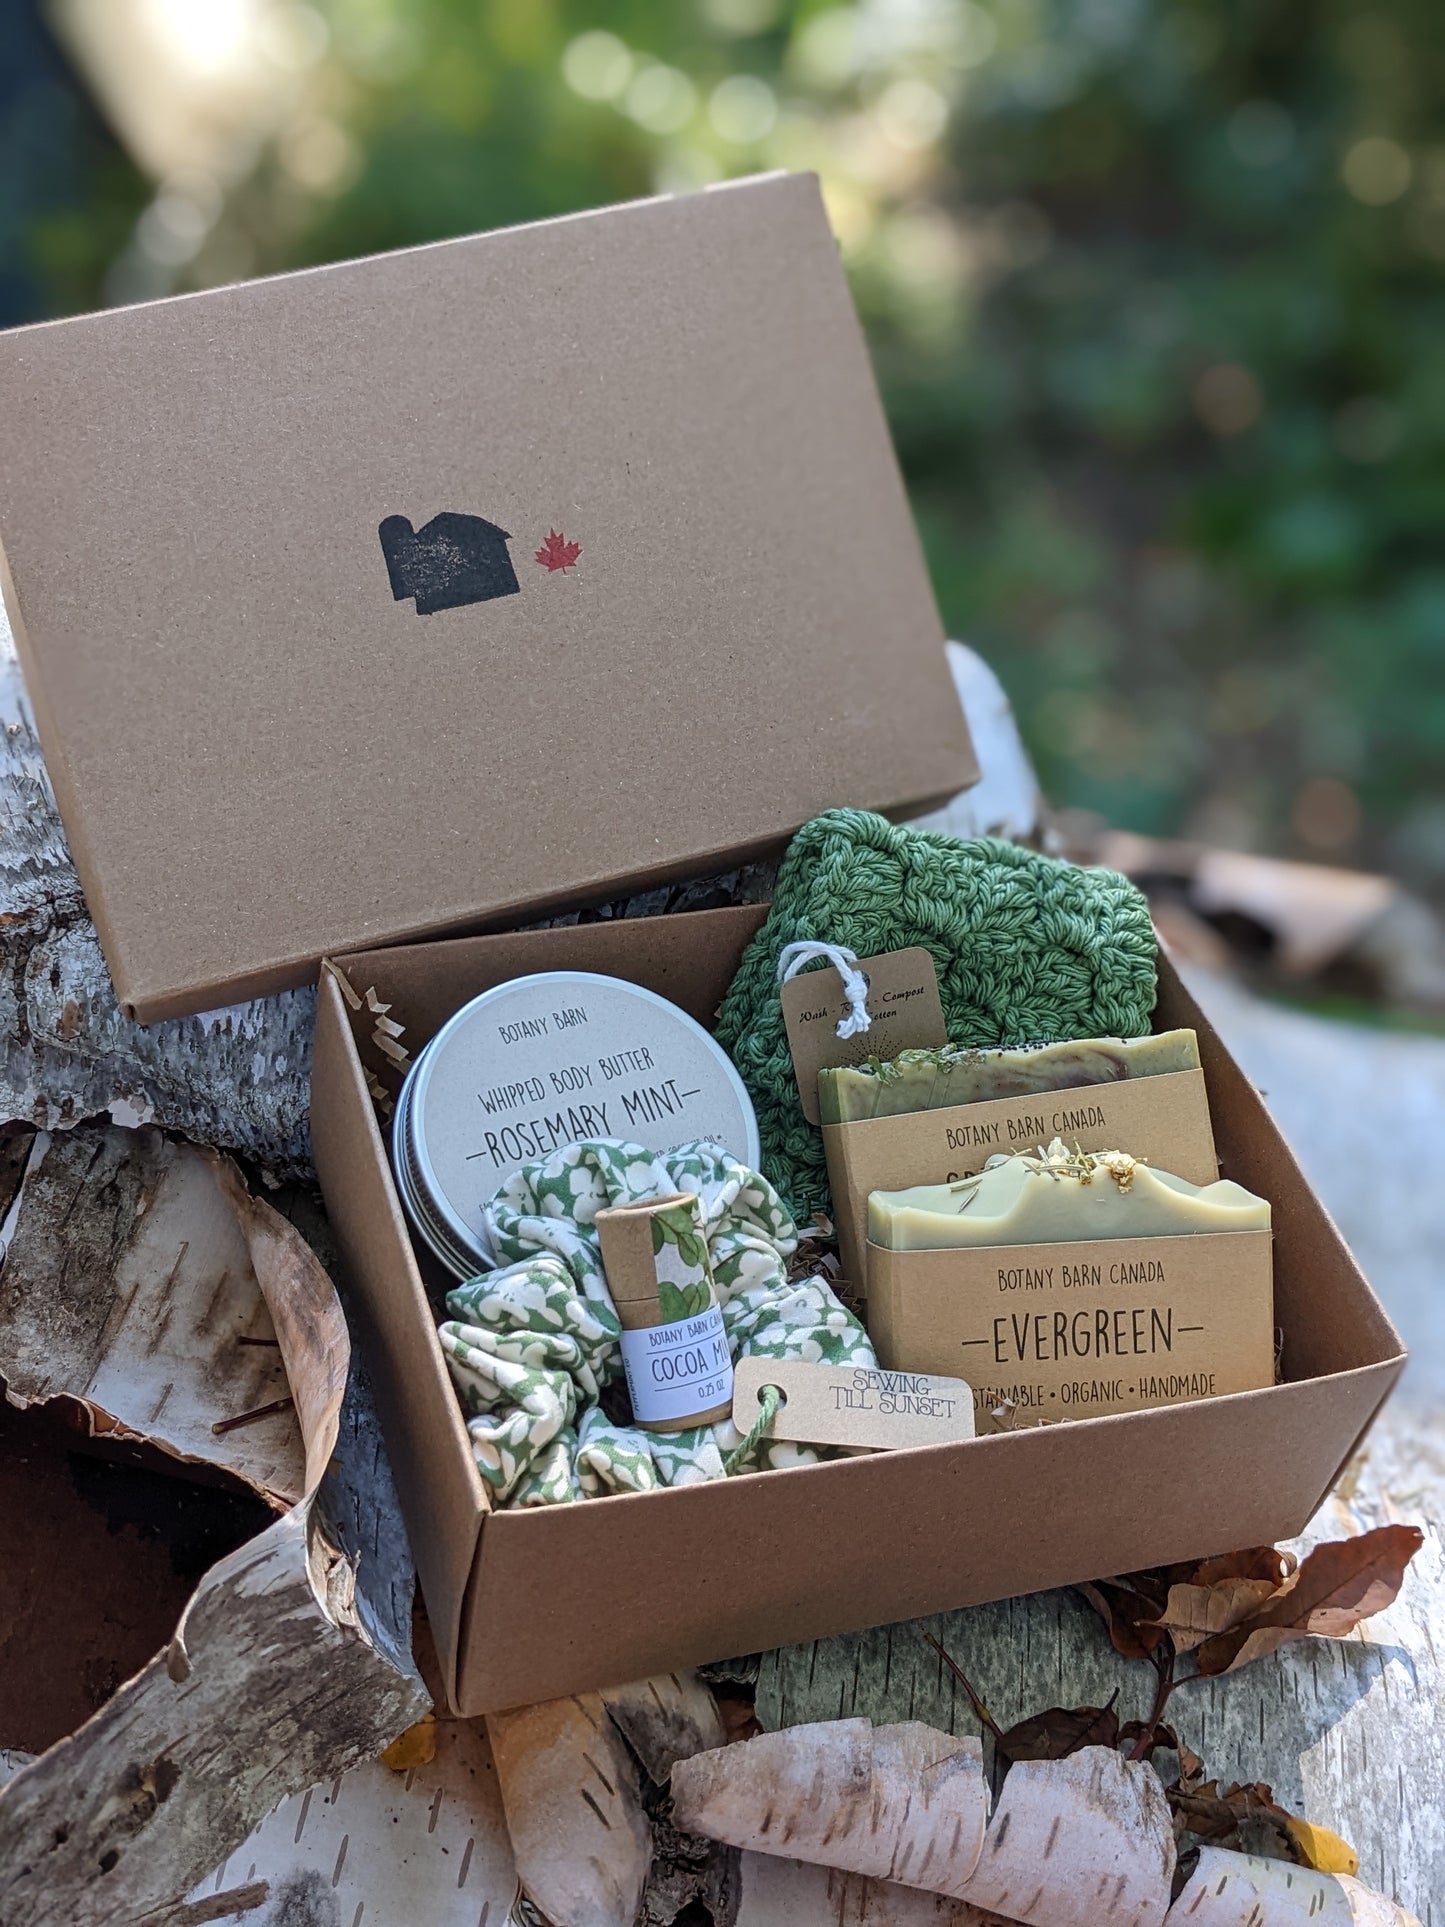 Woodsy Luxury Spa Kit - Holiday Gift Set with Organic Soaps and Crocheted Washcloth, Whipped Body Butter, Handmade Scrunchie & Lip Balm